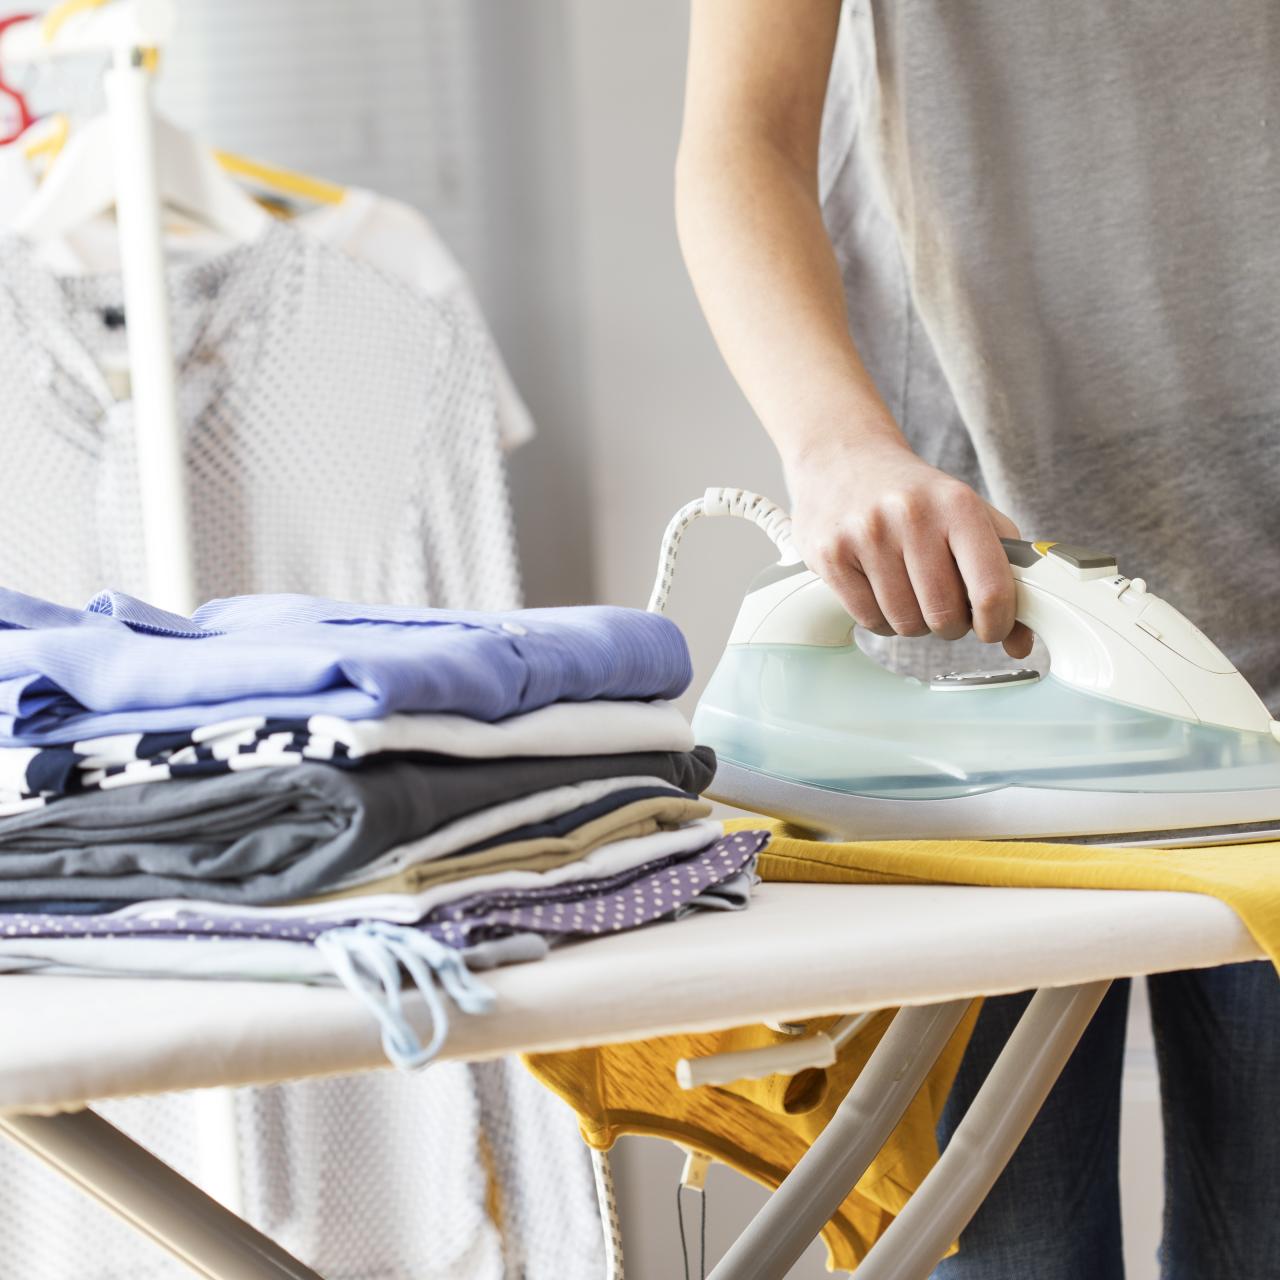 10 Ways to Better Clean Your Clothes and Make Fabrics Last Longer